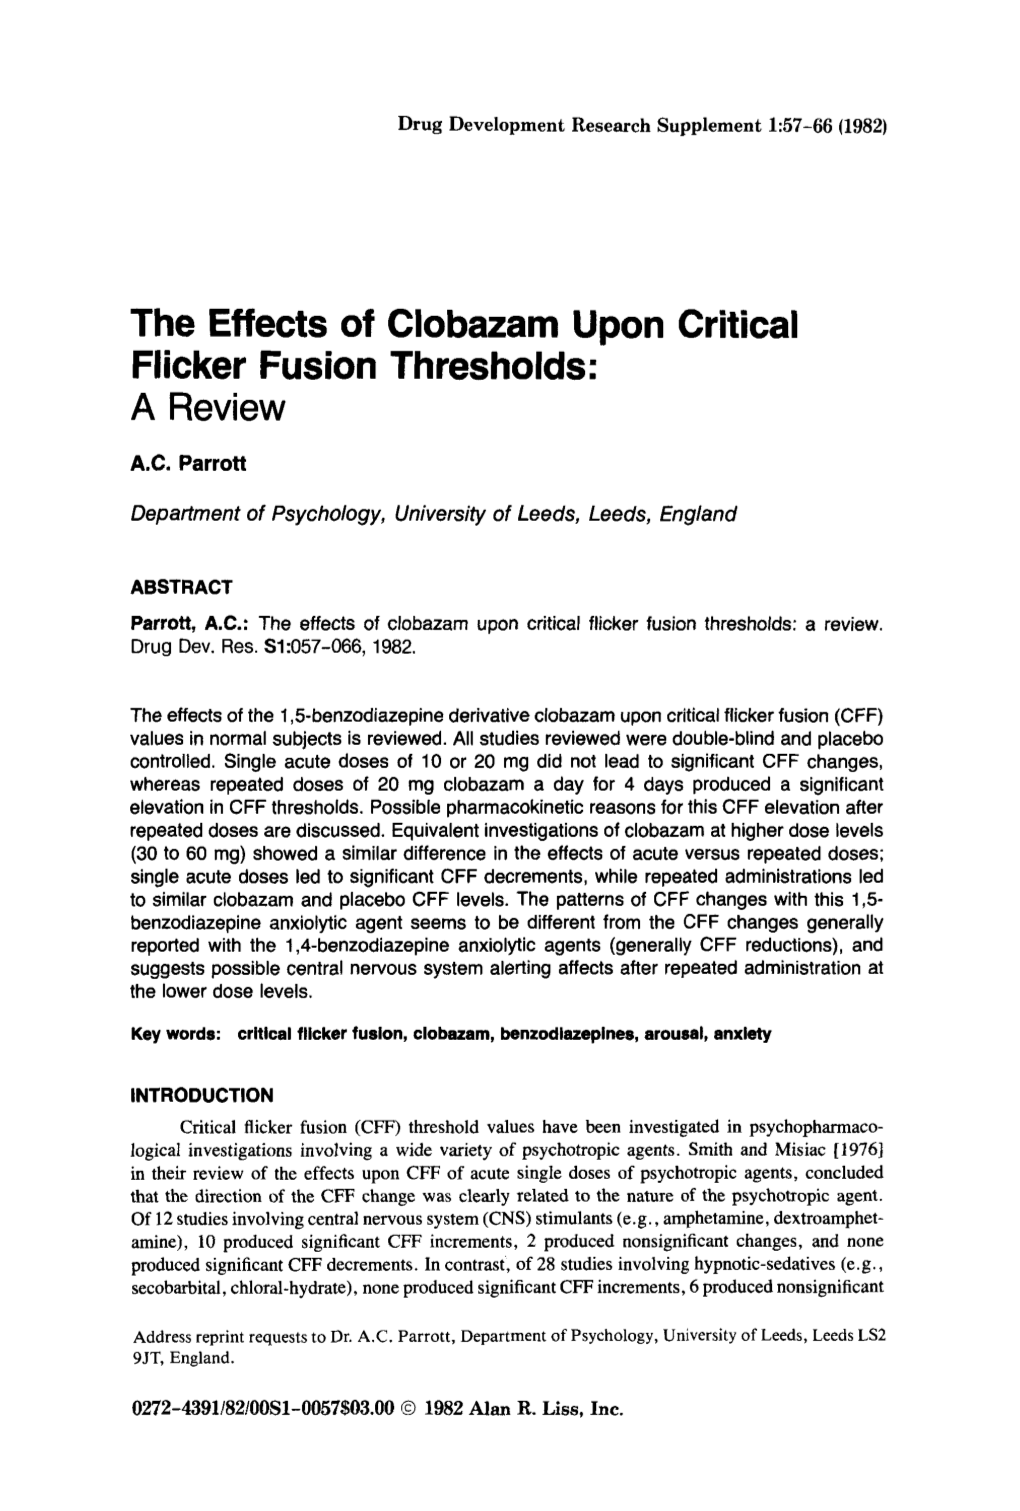 The Effects of Clobazam Upon Critical Flicker Fusion Thresholds: a Review